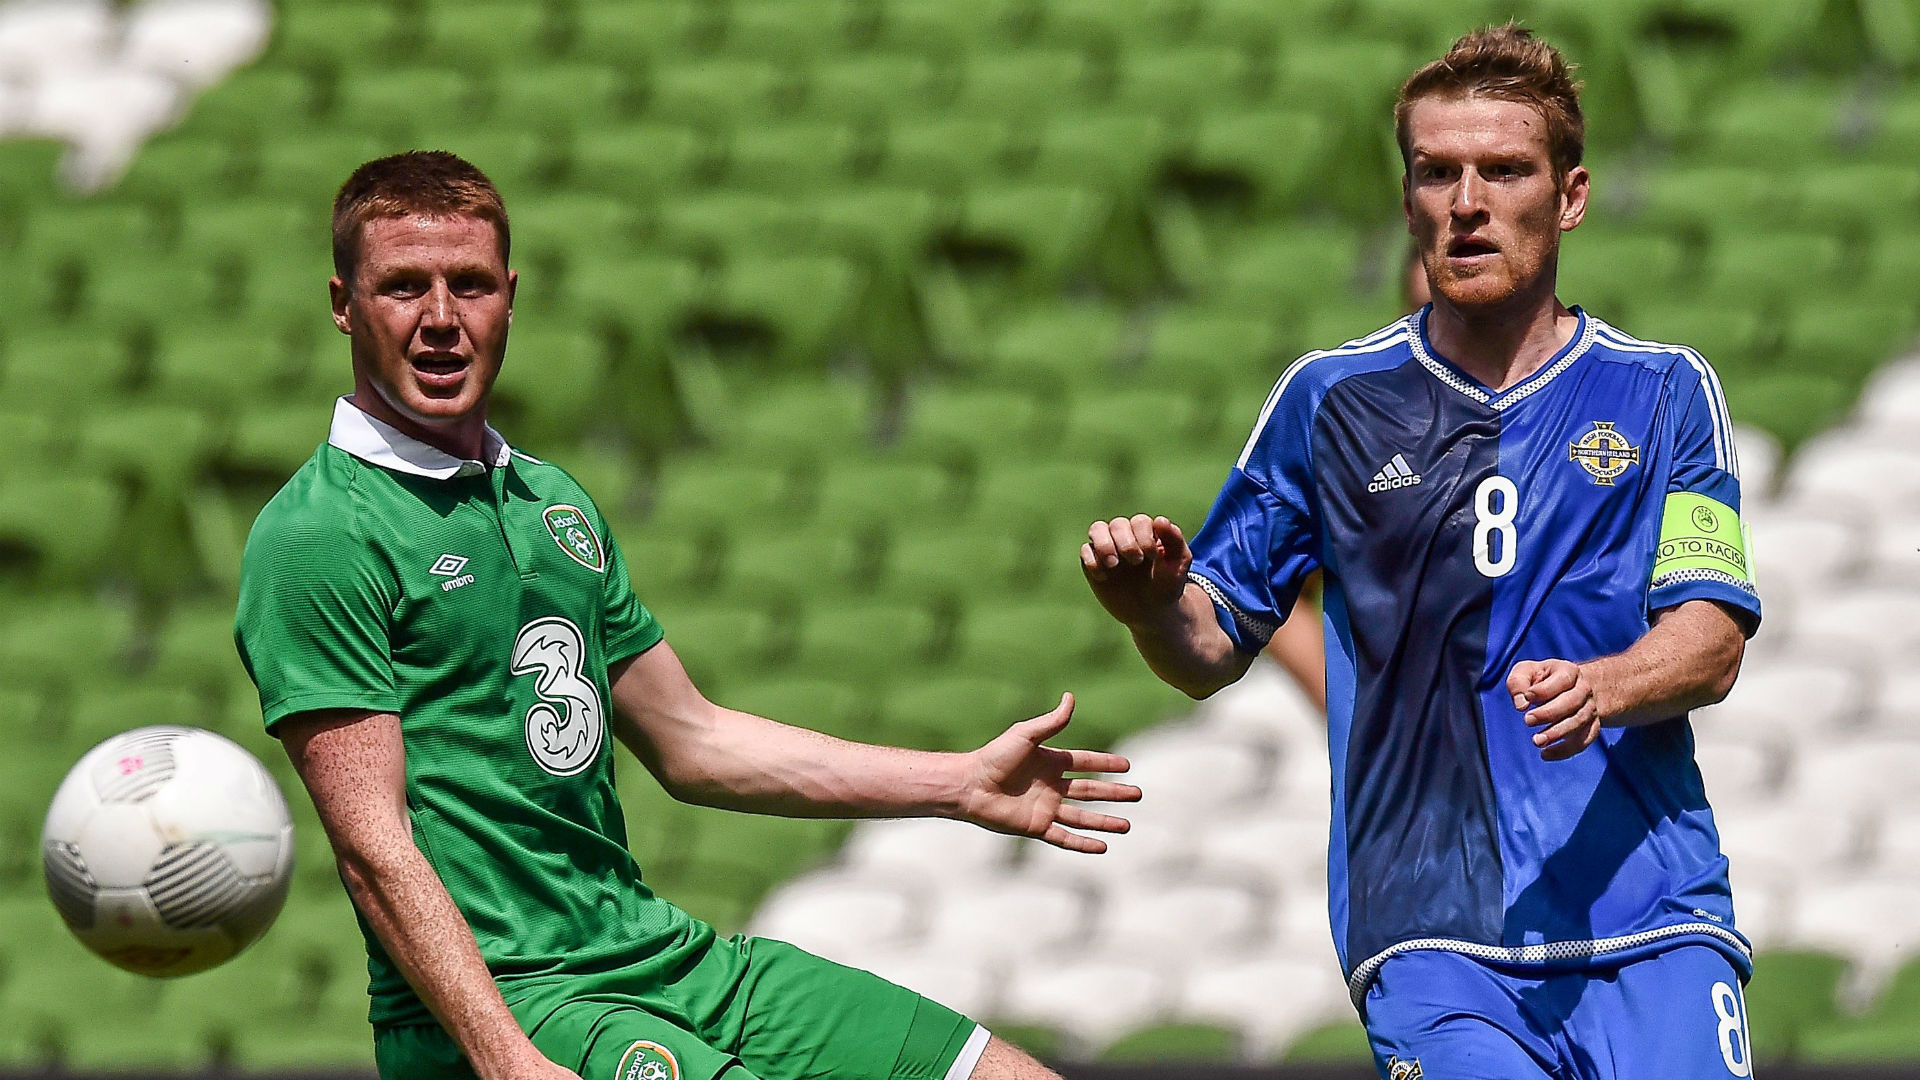 Support For An All Ireland Soccer Team Is Growing Goal